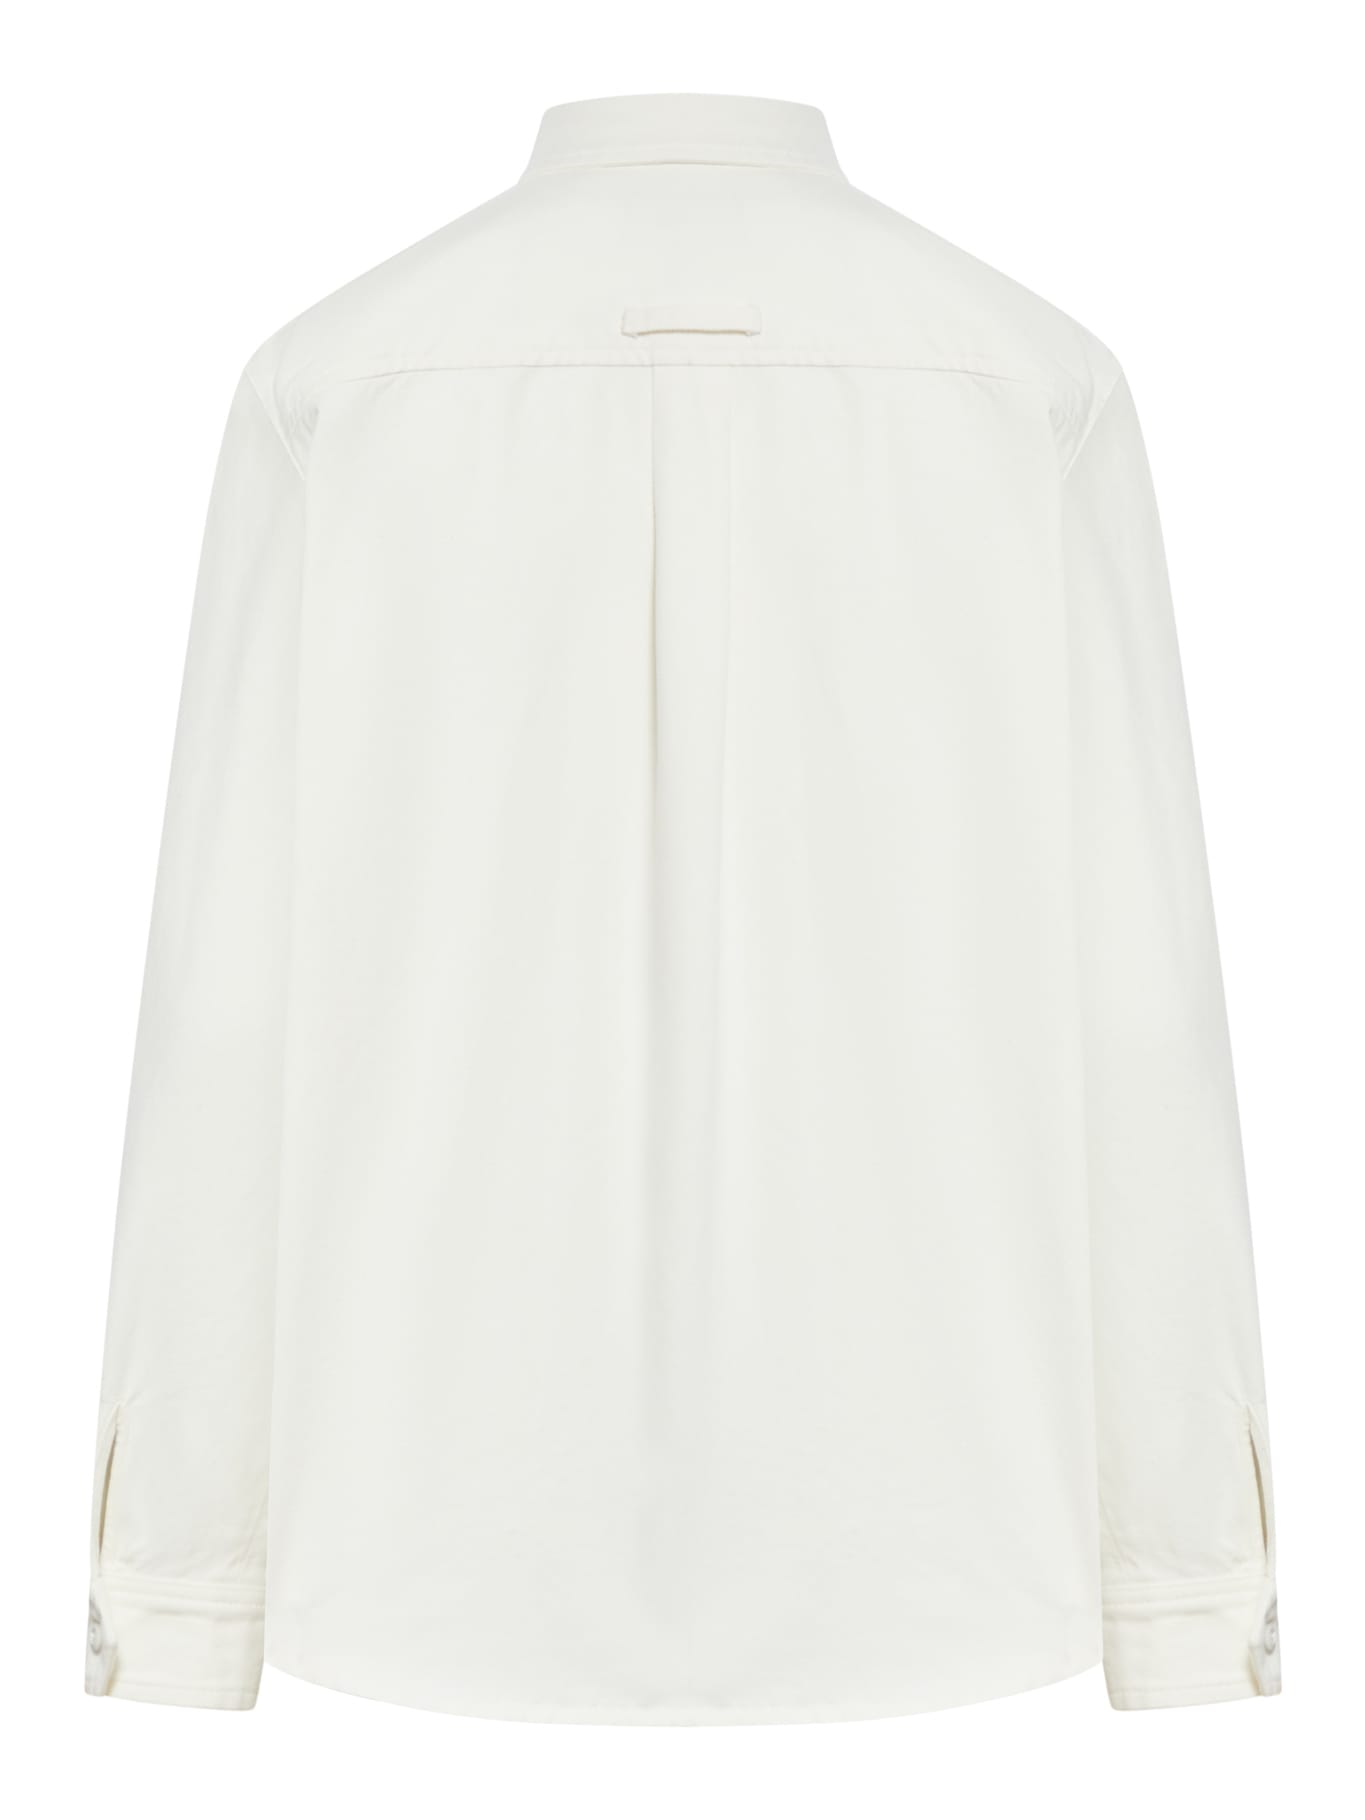 Shop Apc Surchemise Tina In Aac Off White